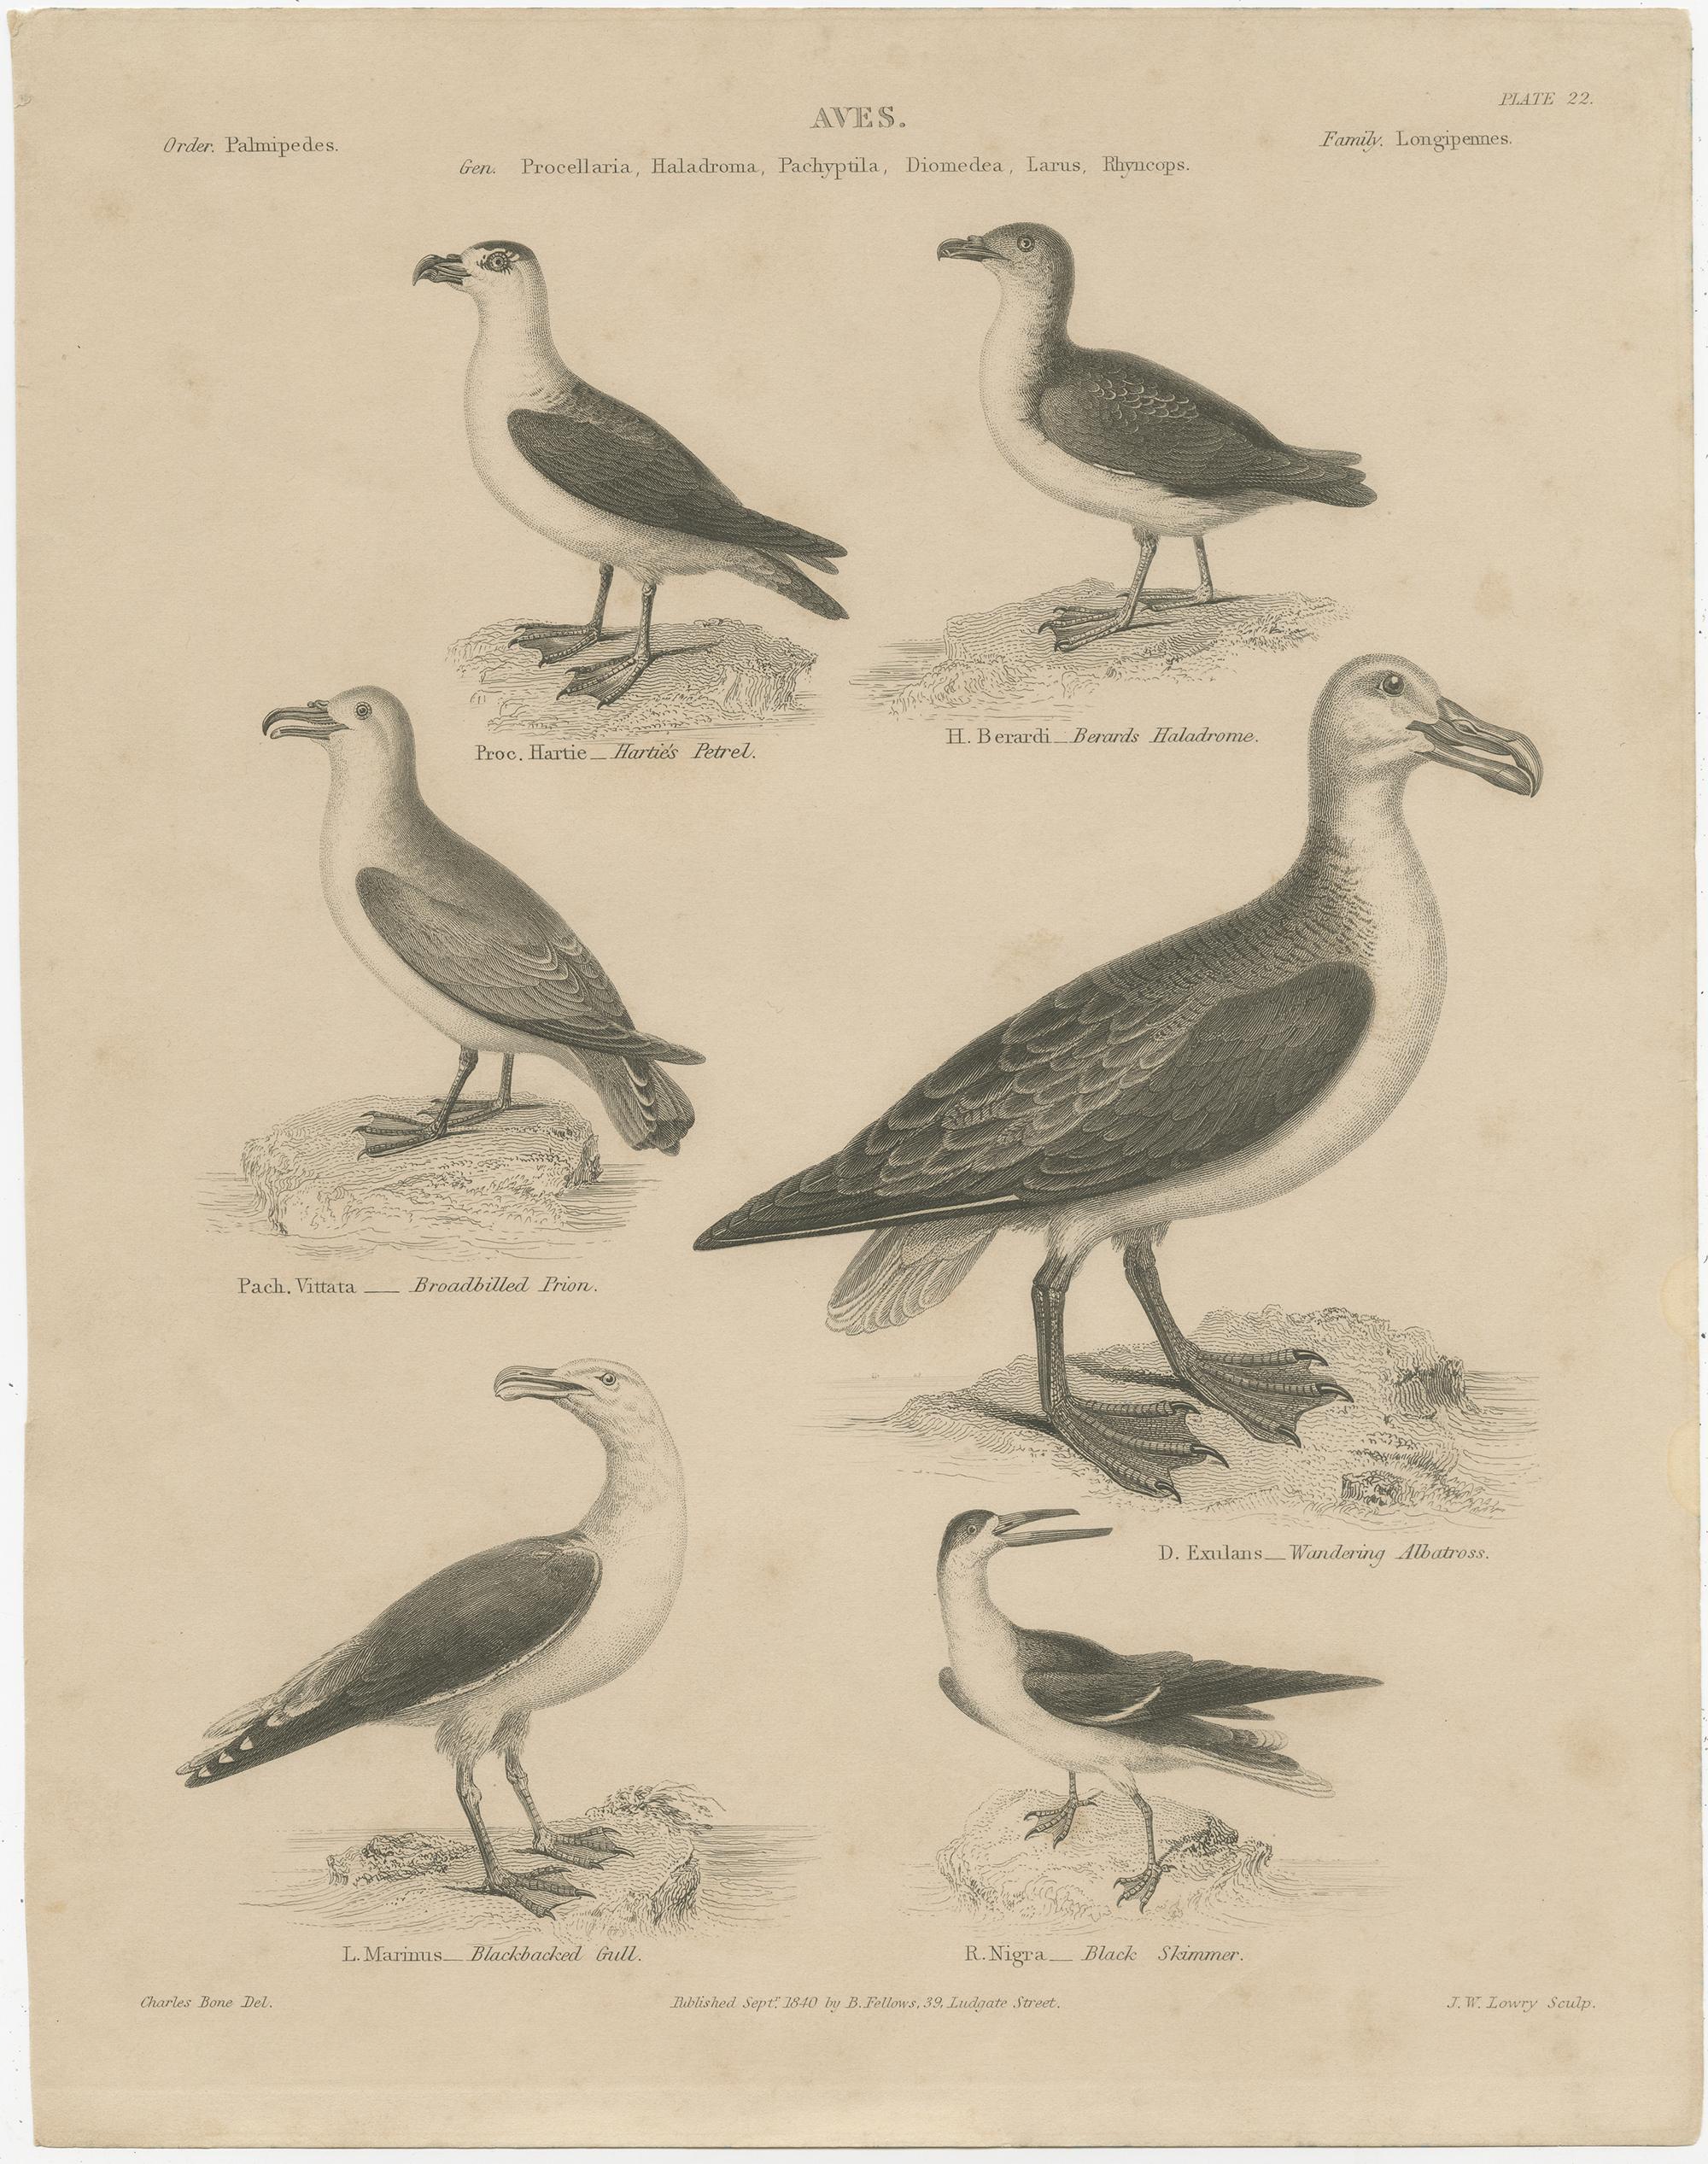 Antique bird print titled 'Aves'. This print shows the Hartie's Petrel, Berards Haladrome, Broadbilled Prion, Wandering Albatross, Blackbacked Gull and Black Skimmer. This print originates from 'Encyclopaedia Metropolitana; or, Universal dictionary